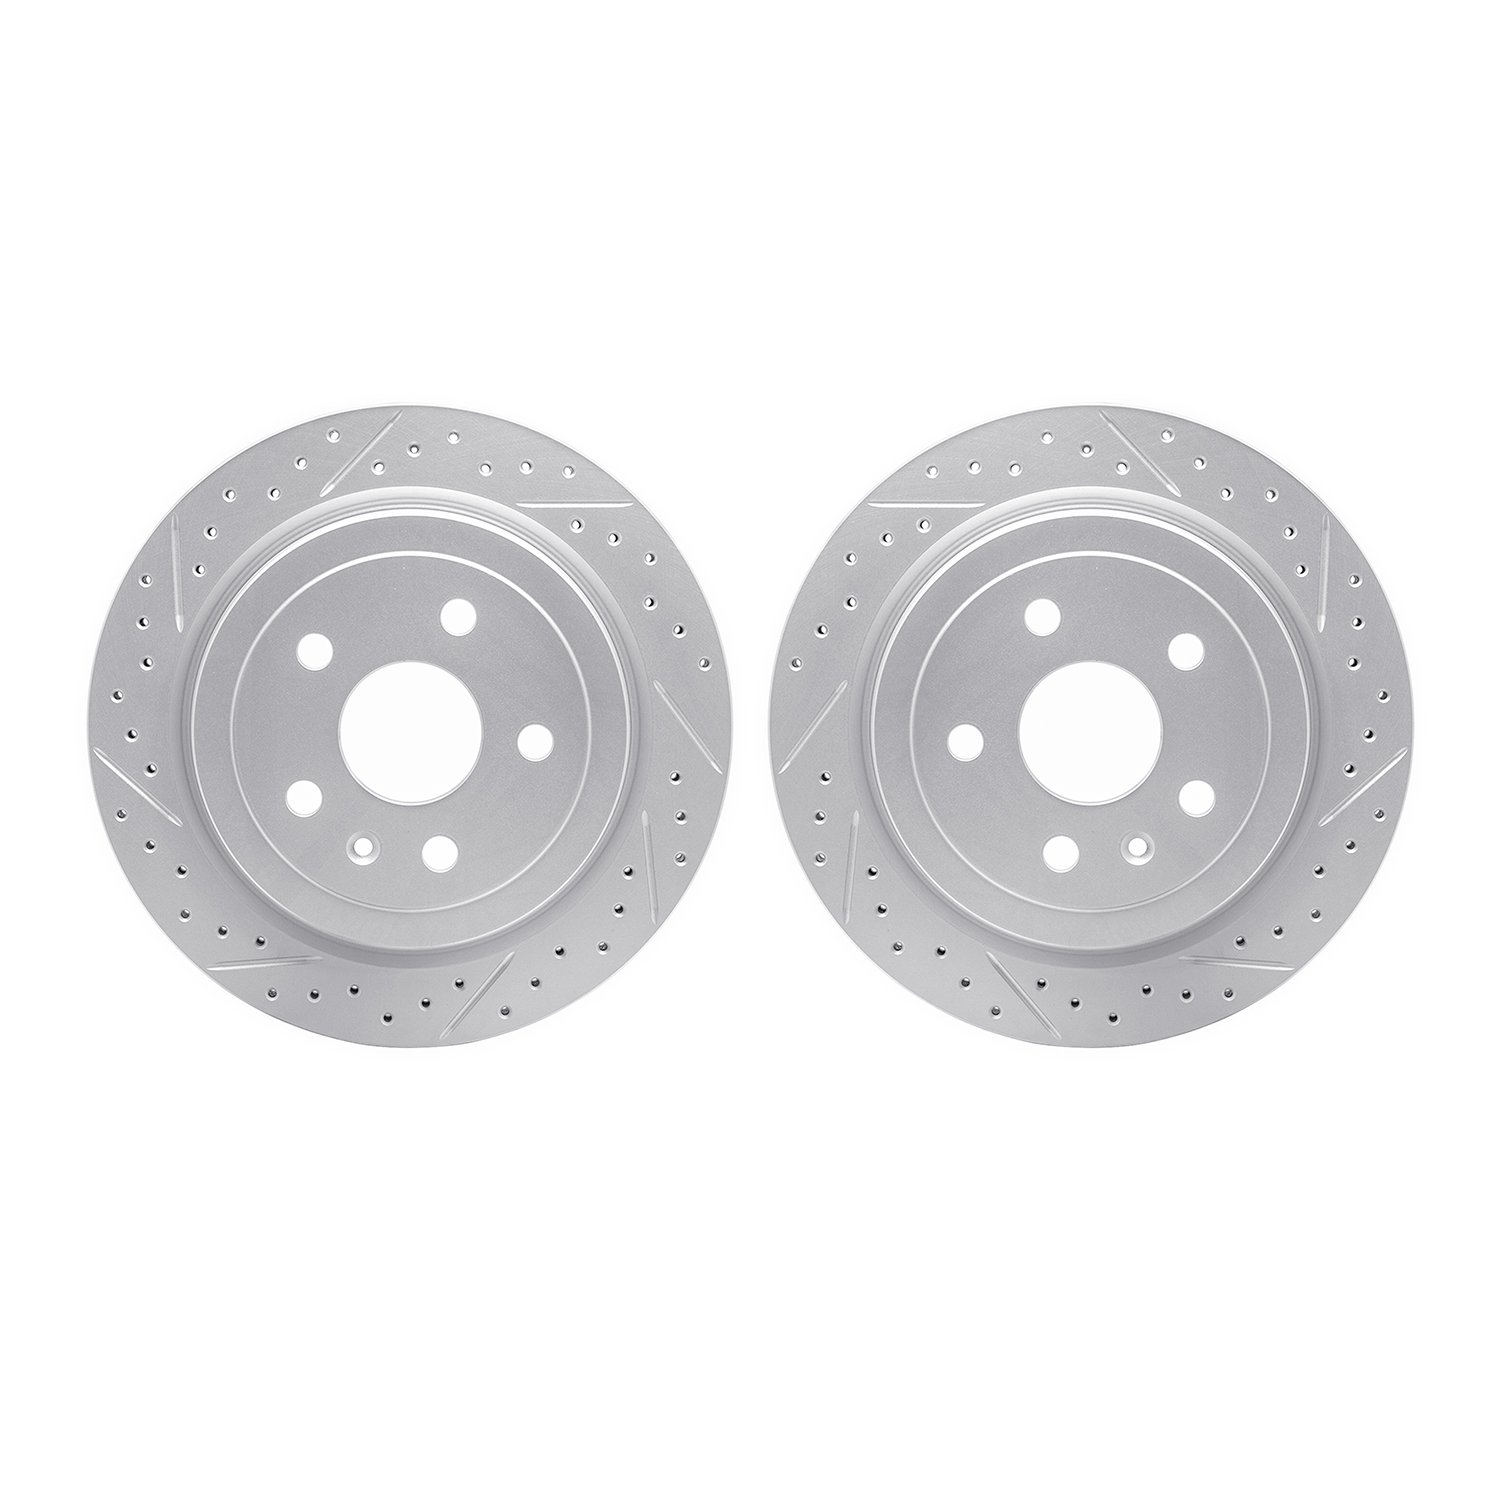 2002-46030 Geoperformance Drilled/Slotted Brake Rotors, 2008-2019 GM, Position: Rear